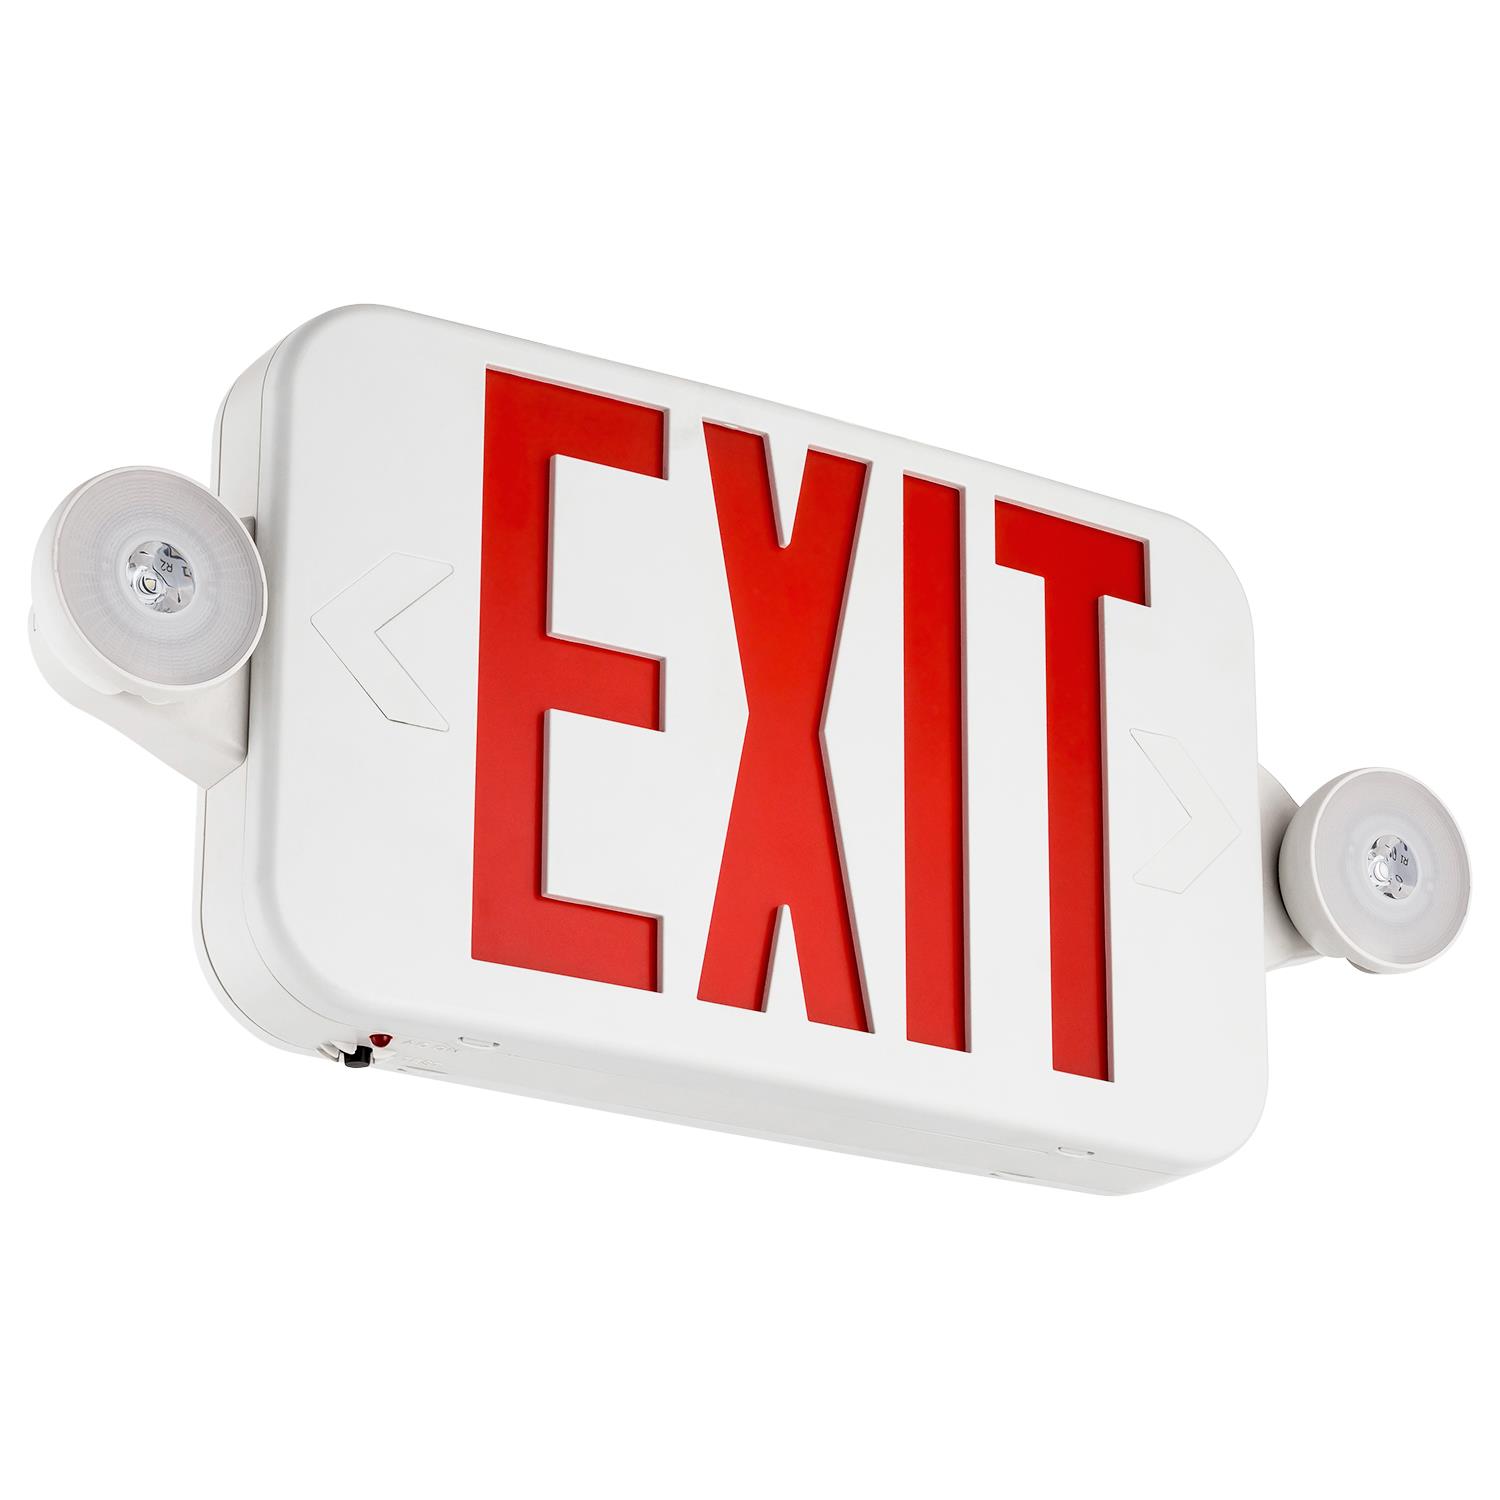 LED Exit Sign and Emergency Lights Ceiling or Wall Mount, Backup